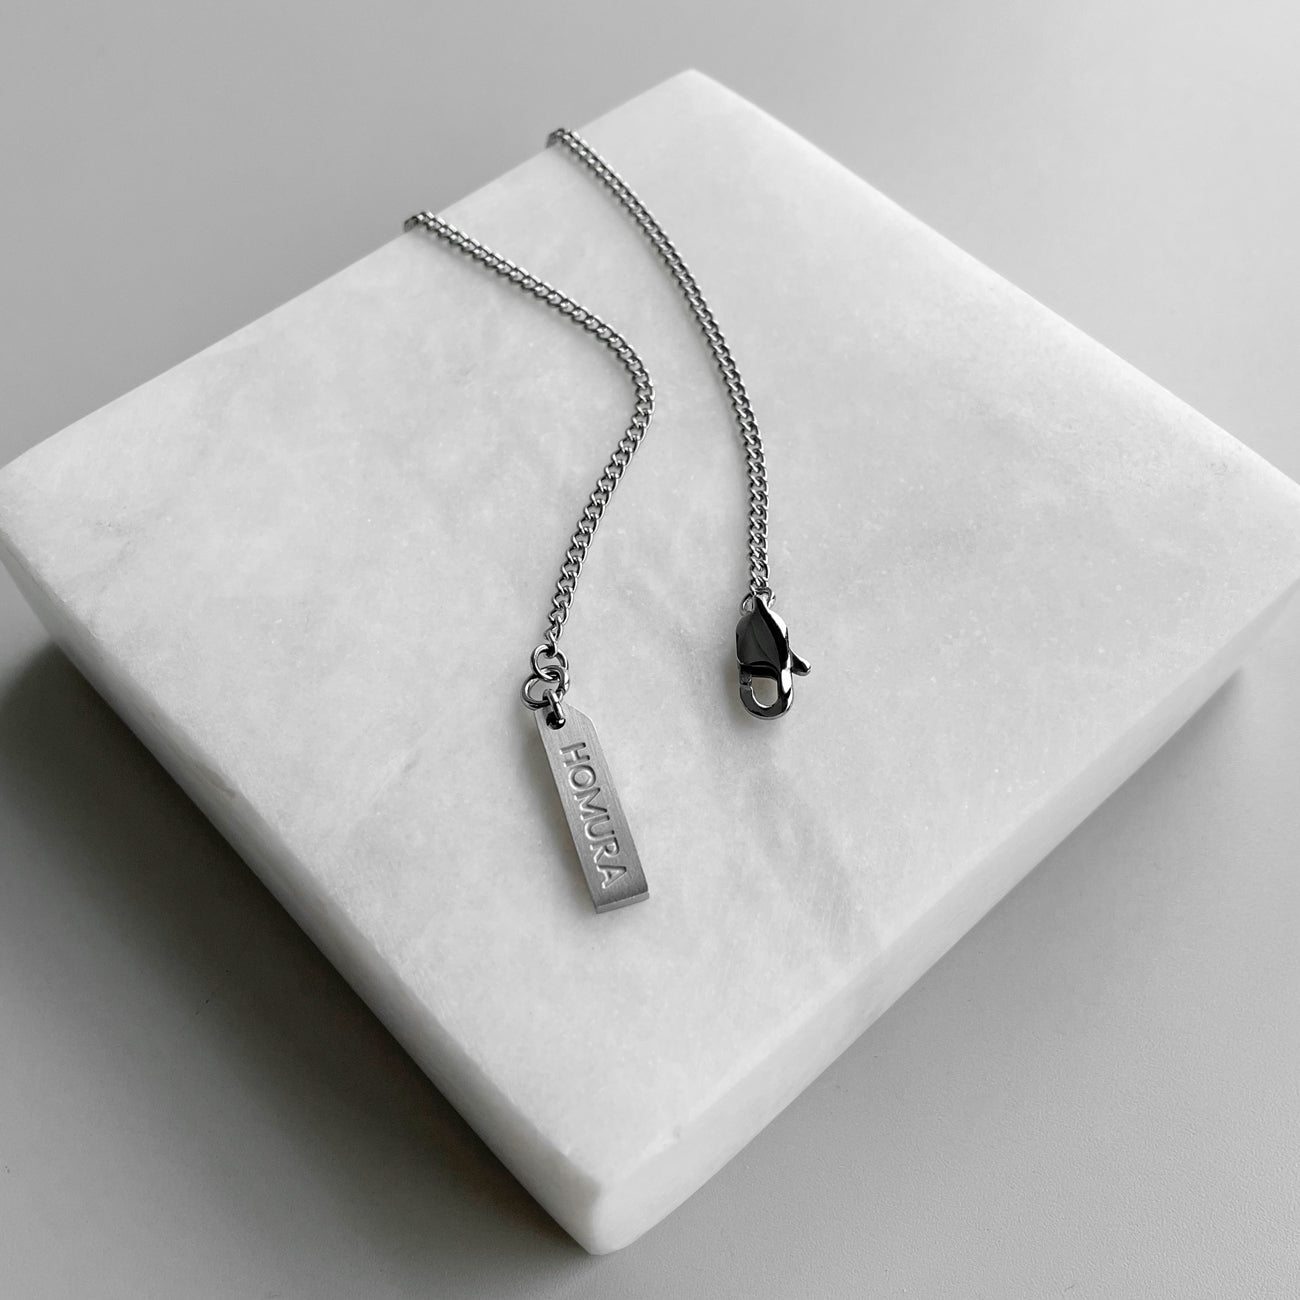 Lineage® Black Obsidian, Necklace